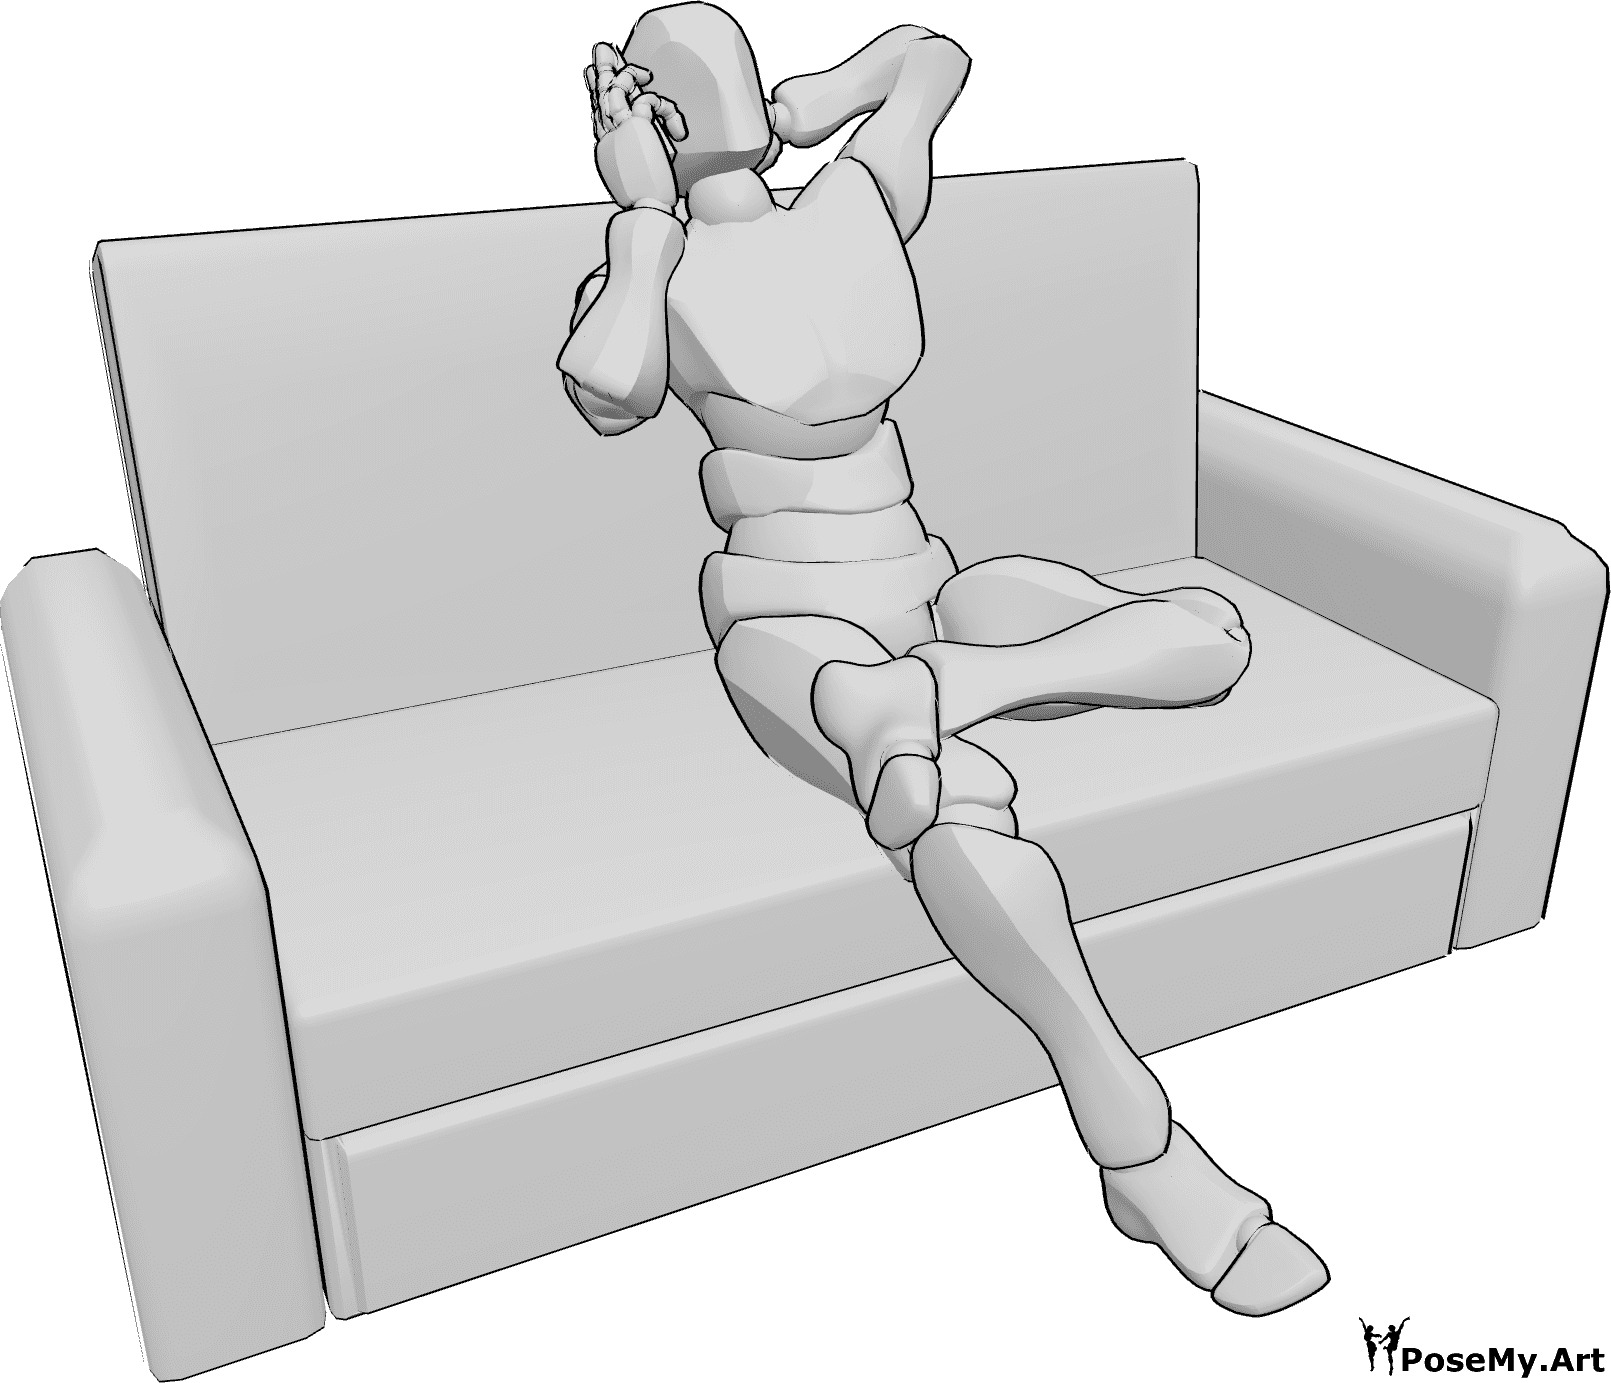 Pose Reference - Sitting sofa talking pose - Male is sitting on the sofa with crossed legs and talking on the phone